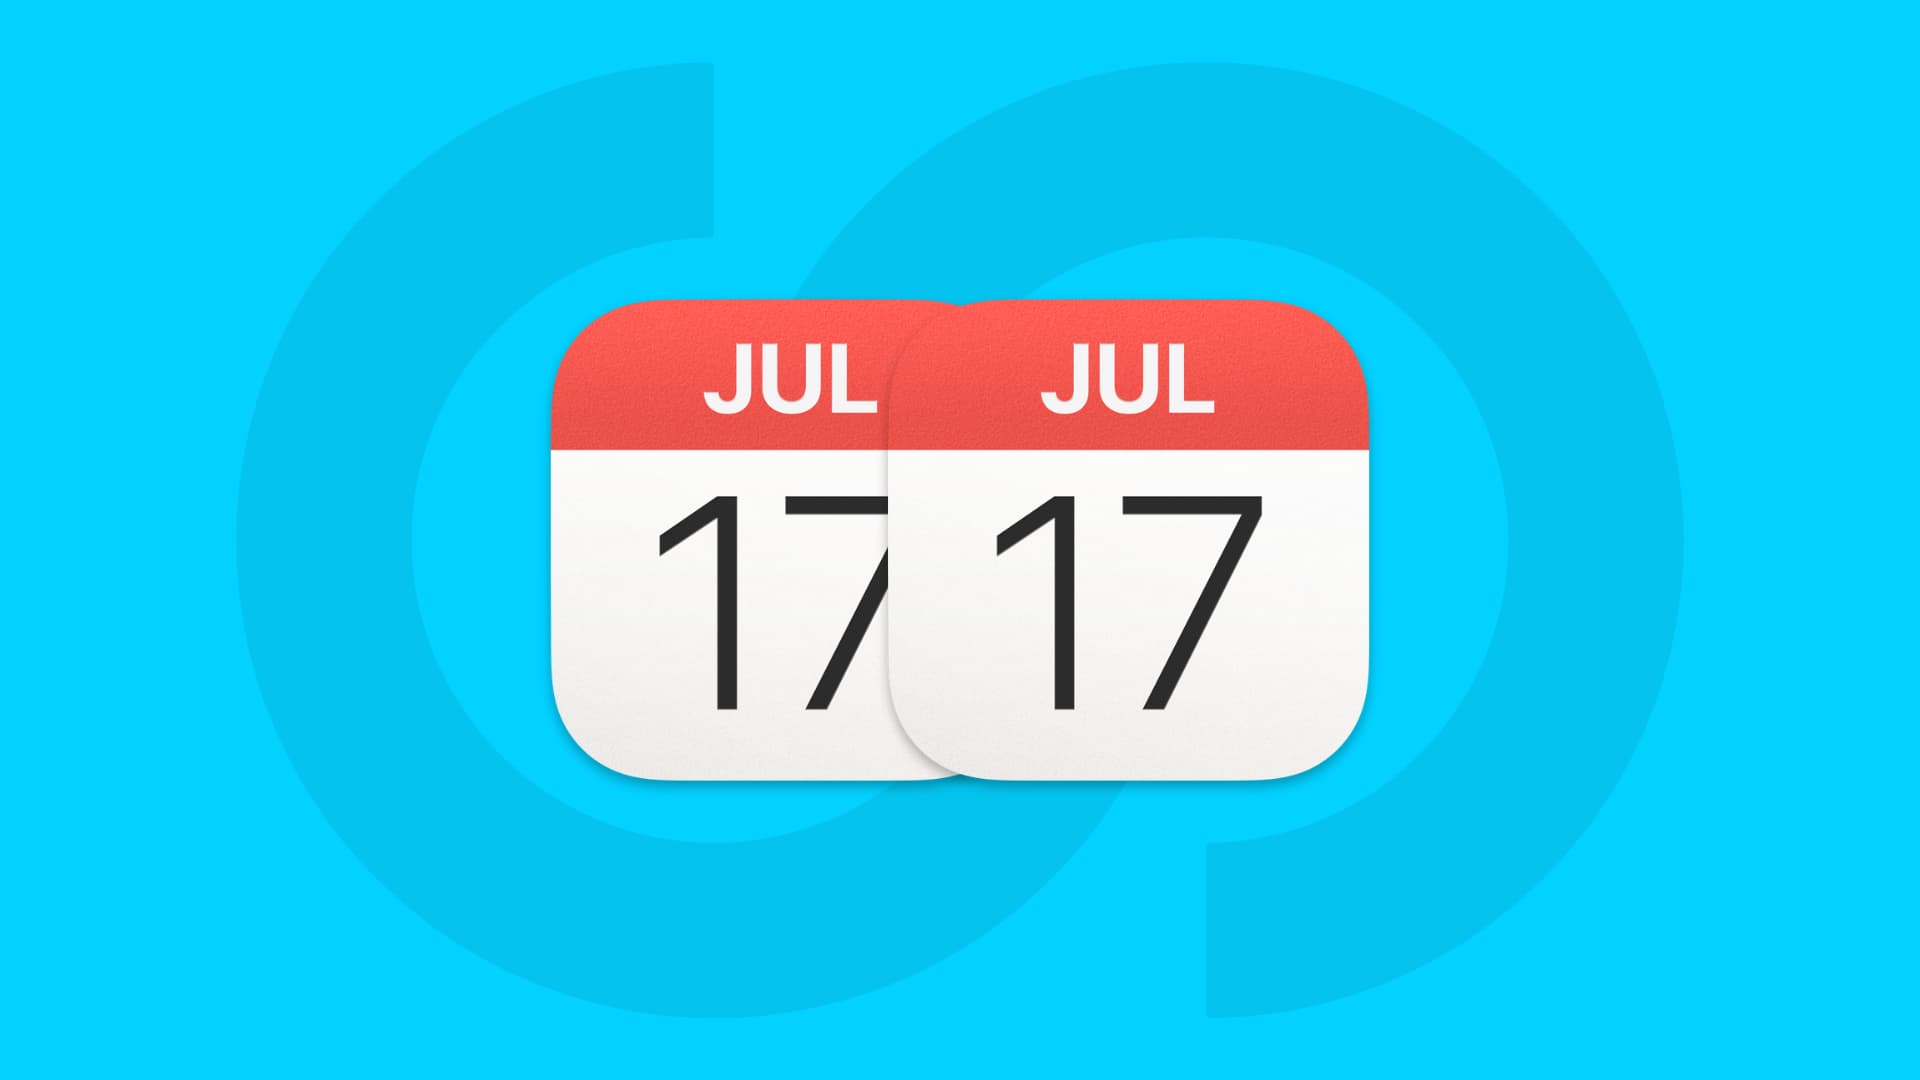 Two Apple Calendar app icons to signify merging them